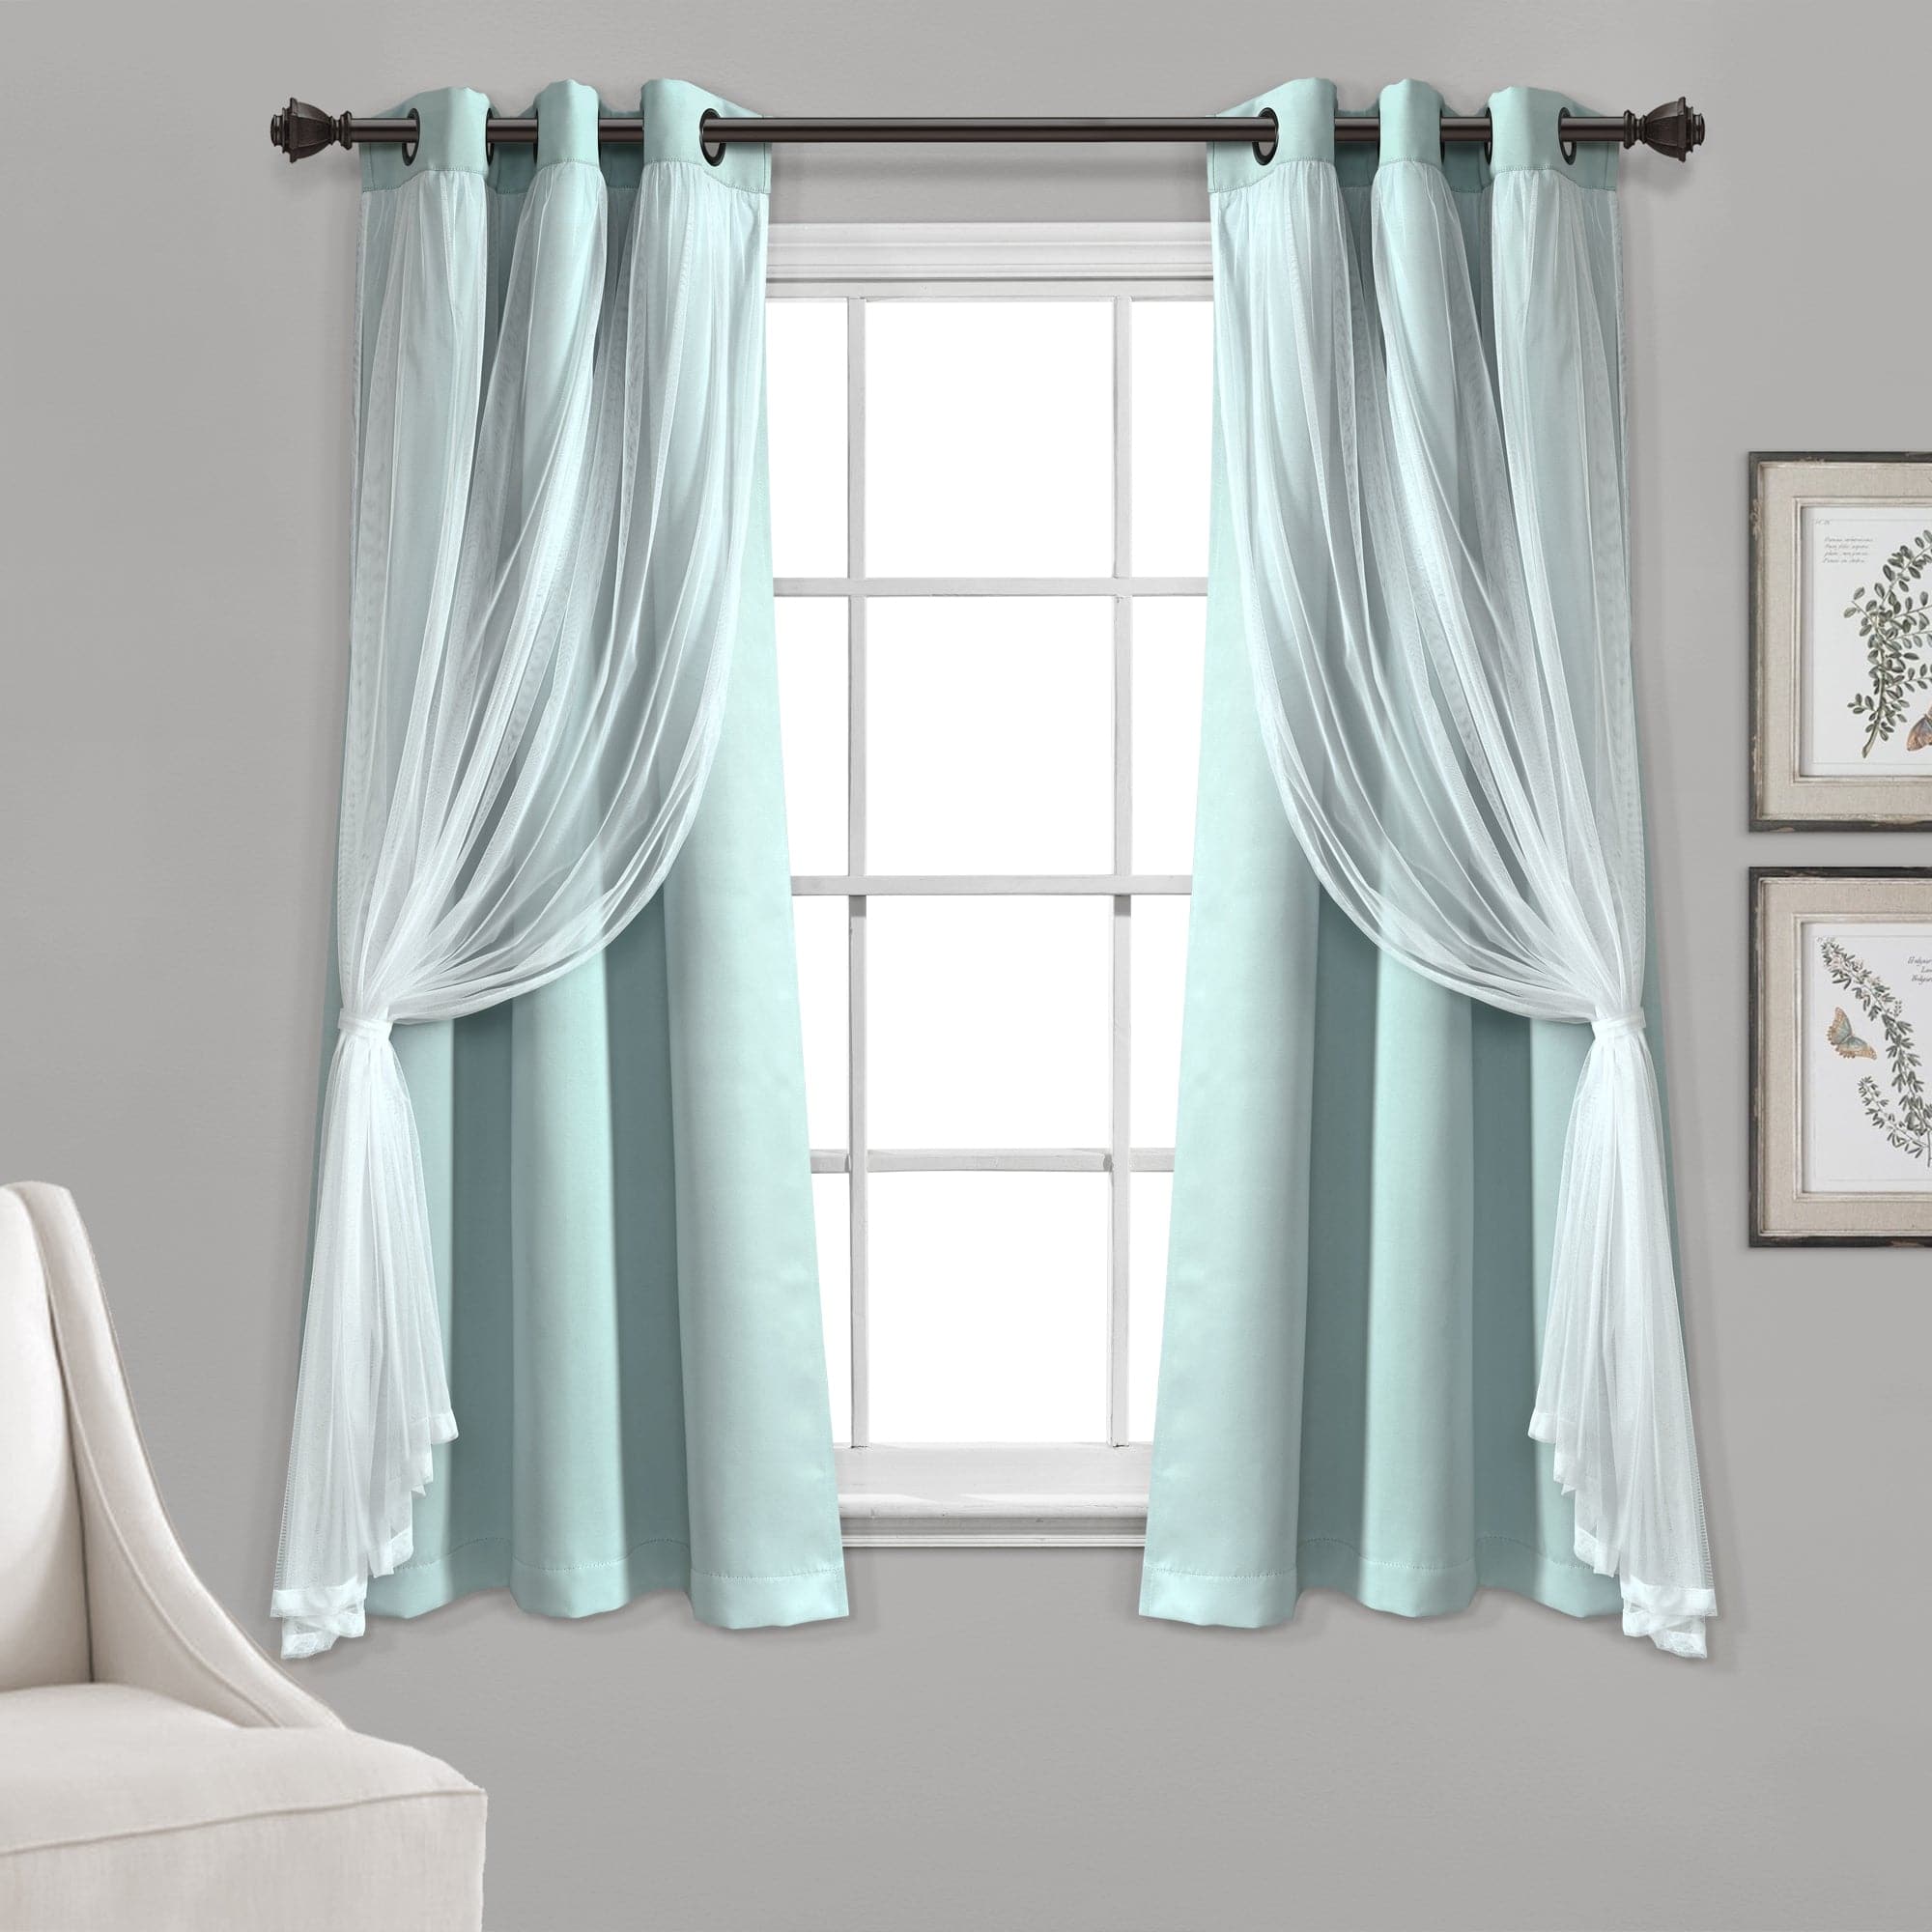 Home Boutique Grommet Sheer Panels With Insulated Blackout Lining